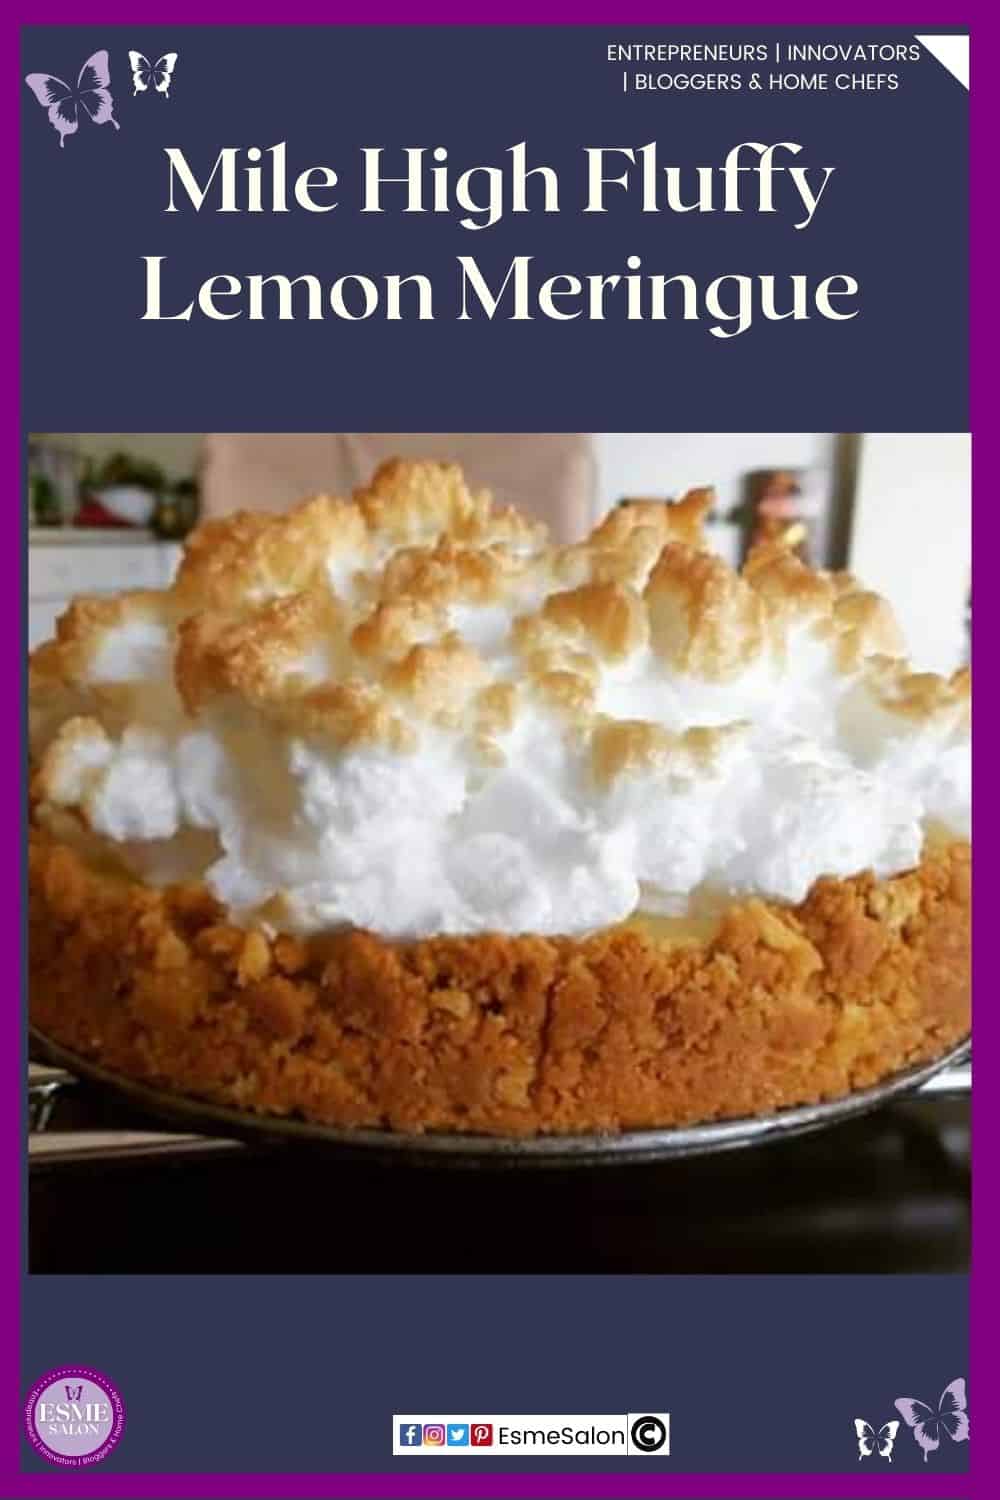 an image of a Lemon Meringue pie with cookie crust and a high pile of meringue